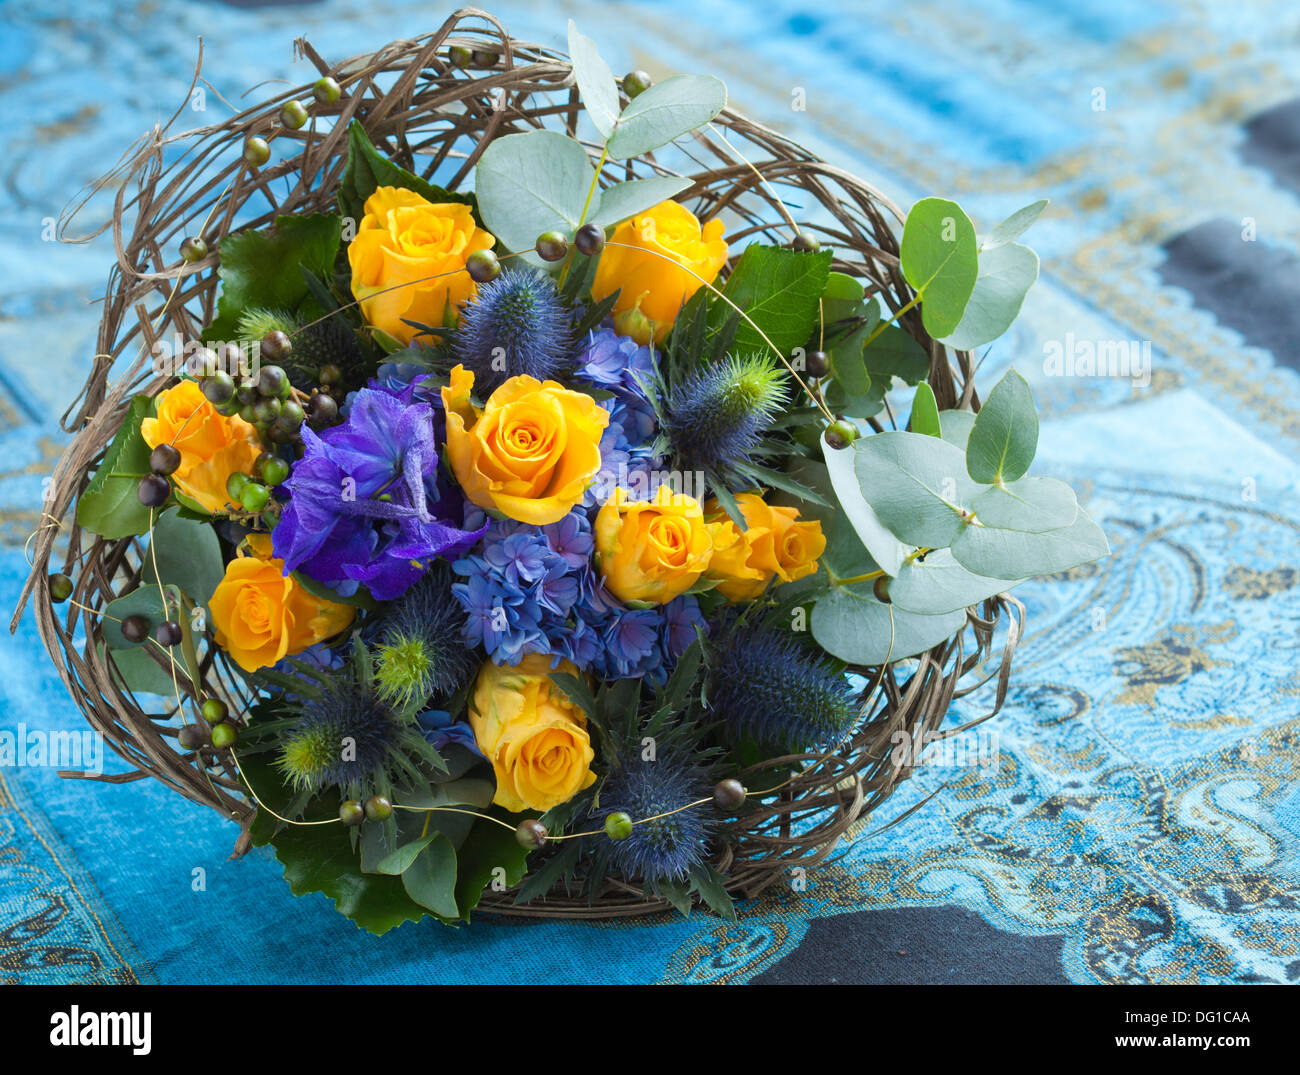 beautiful blue and yellow bouquet with roses Stock Photo